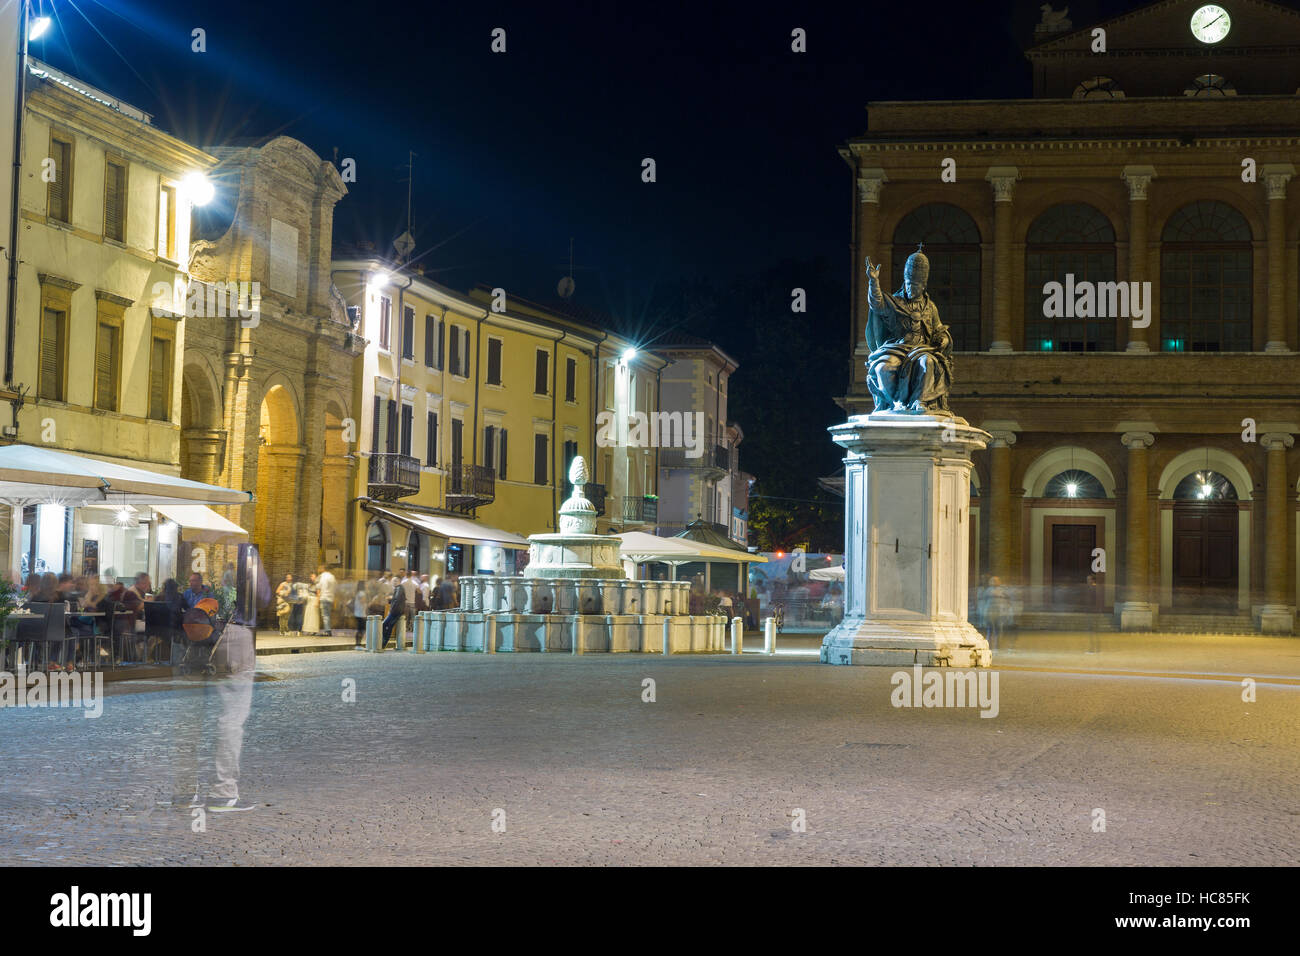 Cavour square with statue of Pope Paul V, Pigna fountain and public theater Amintore Galli at night in Rimini, Italy. Stock Photo